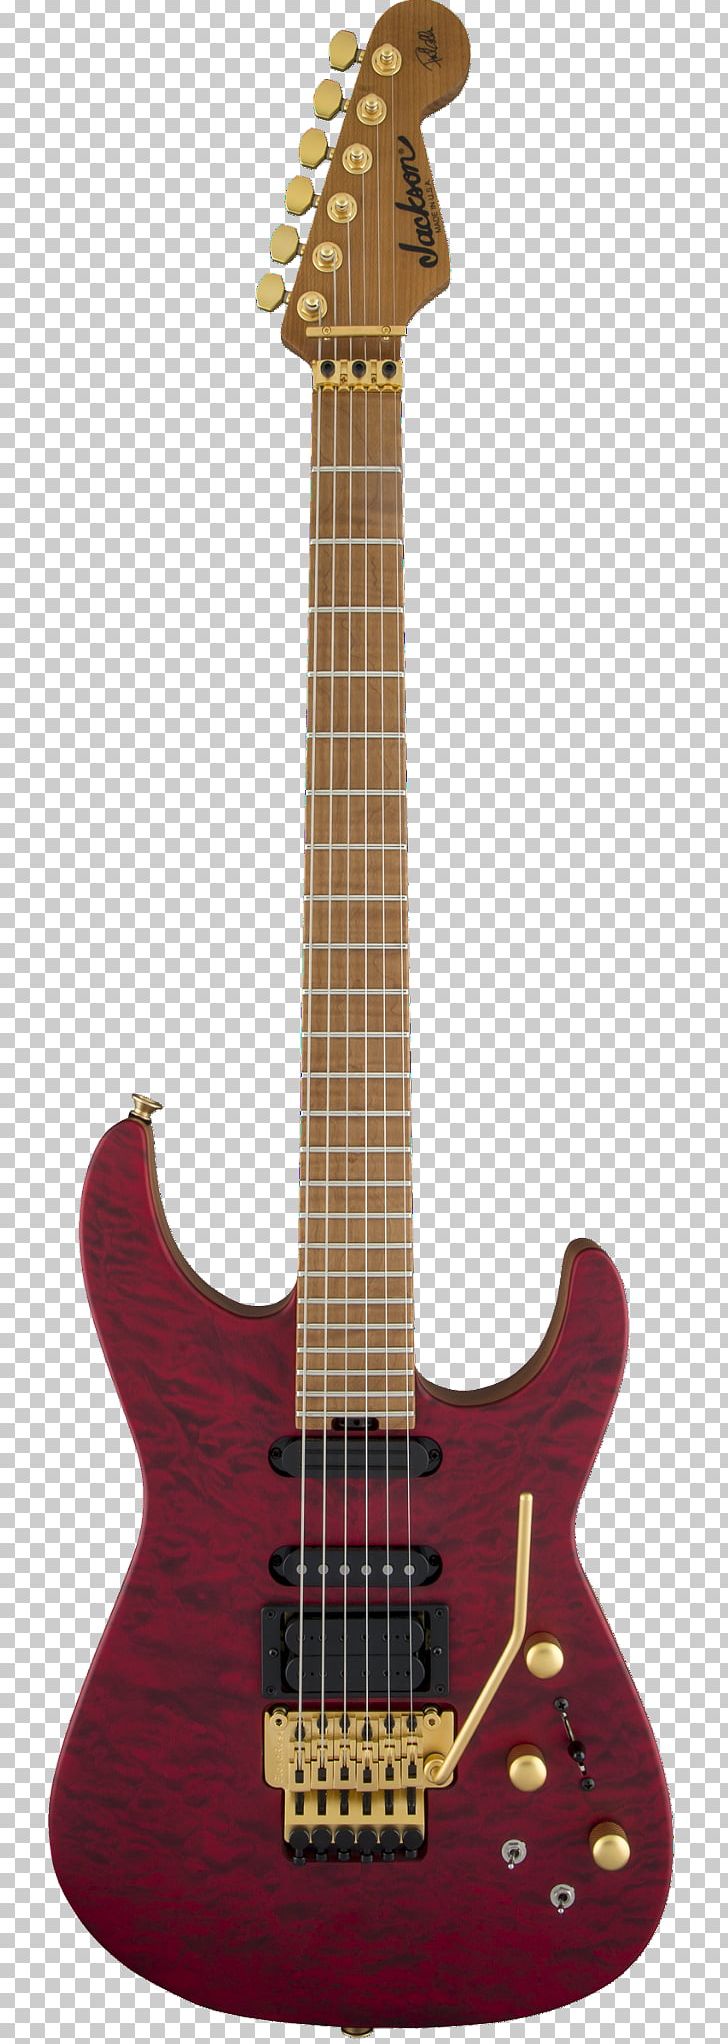 Fender Stratocaster Fender Precision Bass Fender Mustang Bass Electric Guitar PNG, Clipart, Acoustic Electric Guitar, Bass Guitar, Cort Guitars, Fingerboard, Gl Musical Instruments Free PNG Download